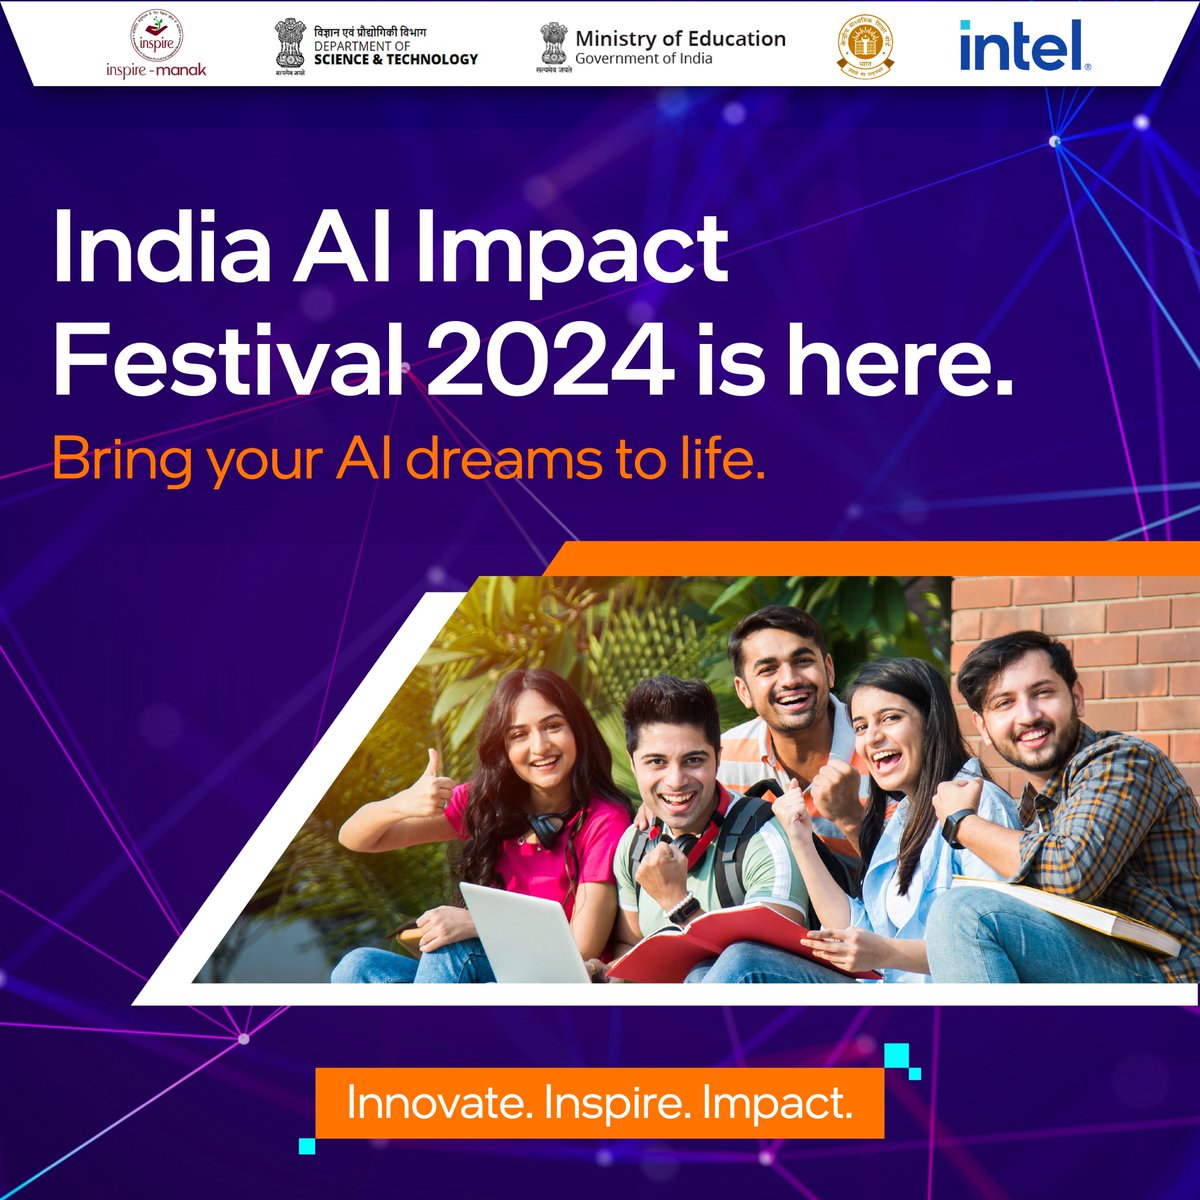 Did you know you can use #AI to design better prosthetic limbs? Or teach a robot to clean up polluted rivers? That's the power of AI for good! Turn your curiosity into impact at the #IndiaAIImpactFestival 2024. Learn more - linktr.ee/IndiaAIImpactF…

#AI4Youth #AIskills #AISC #AIoT